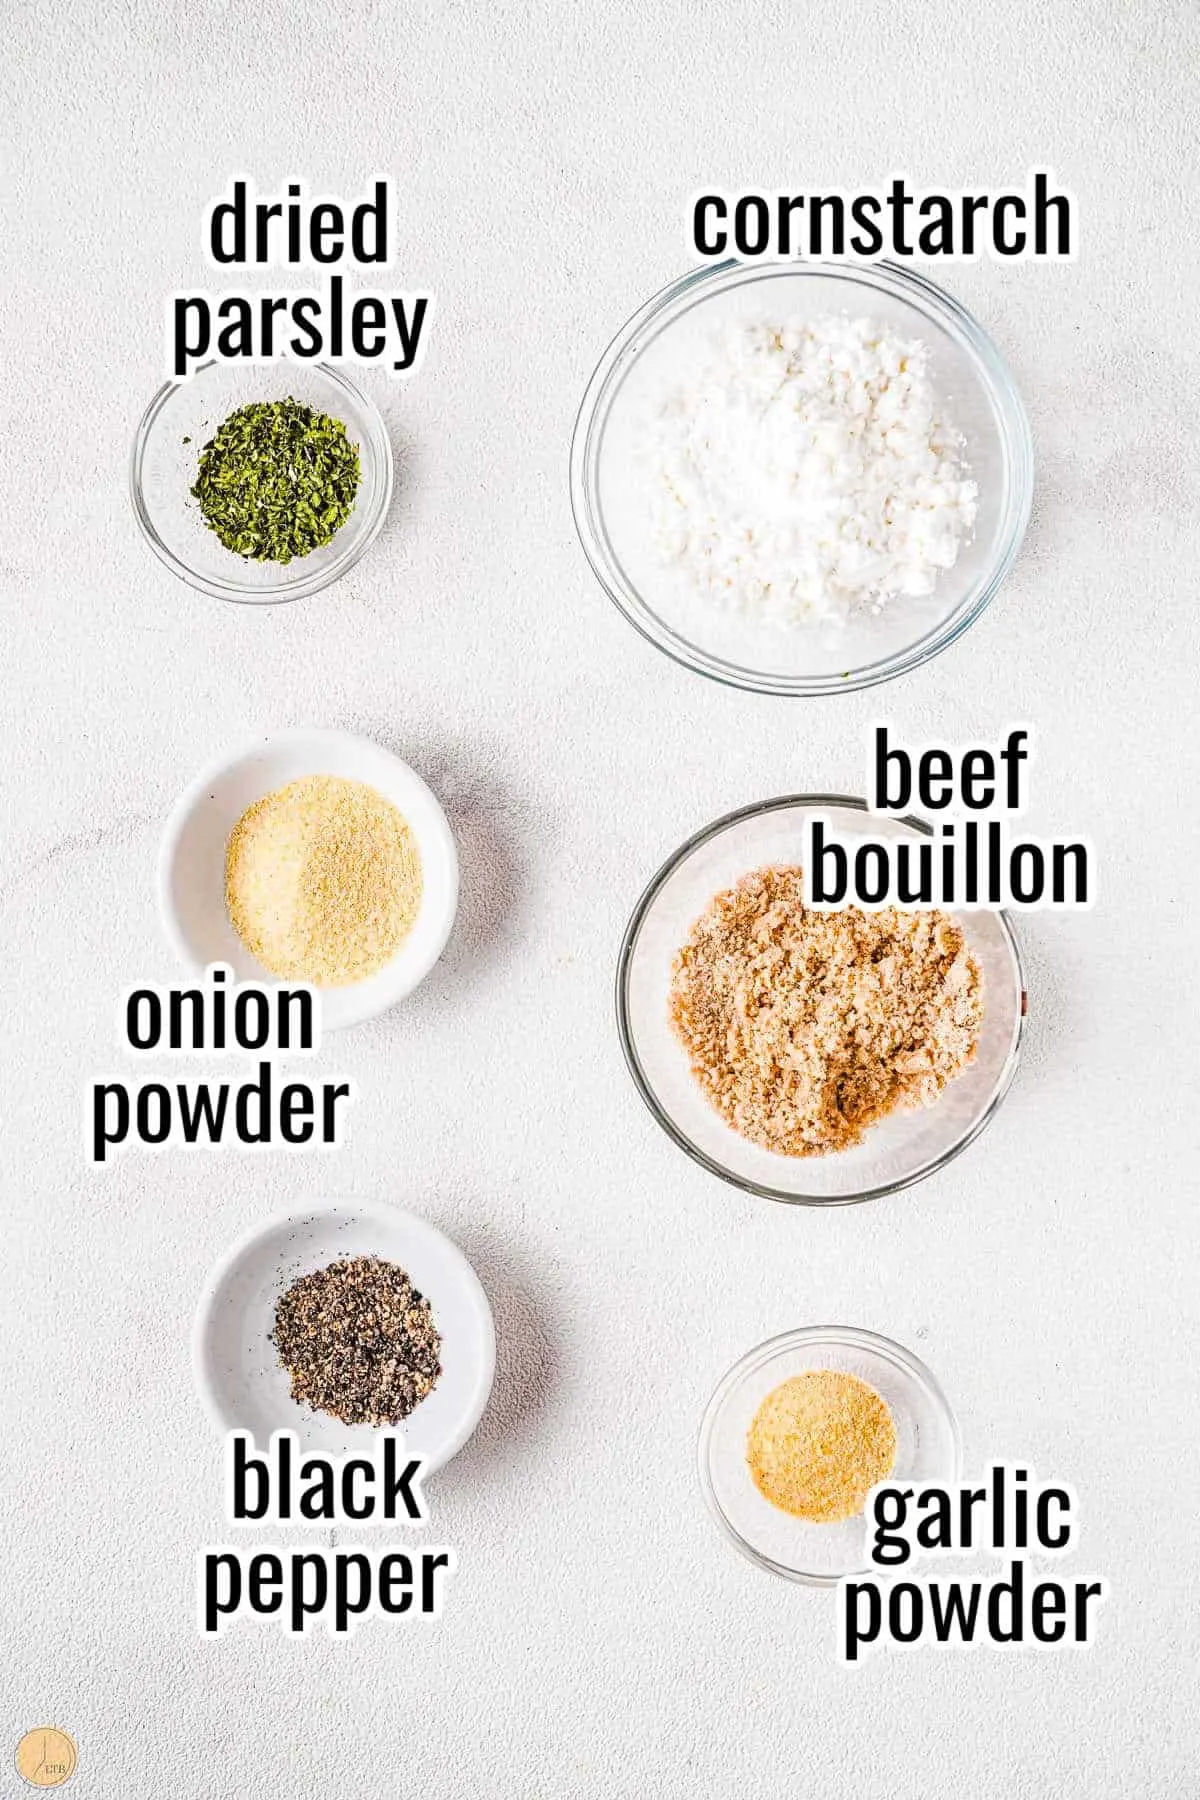 ingredients needed for a dry gravy mix